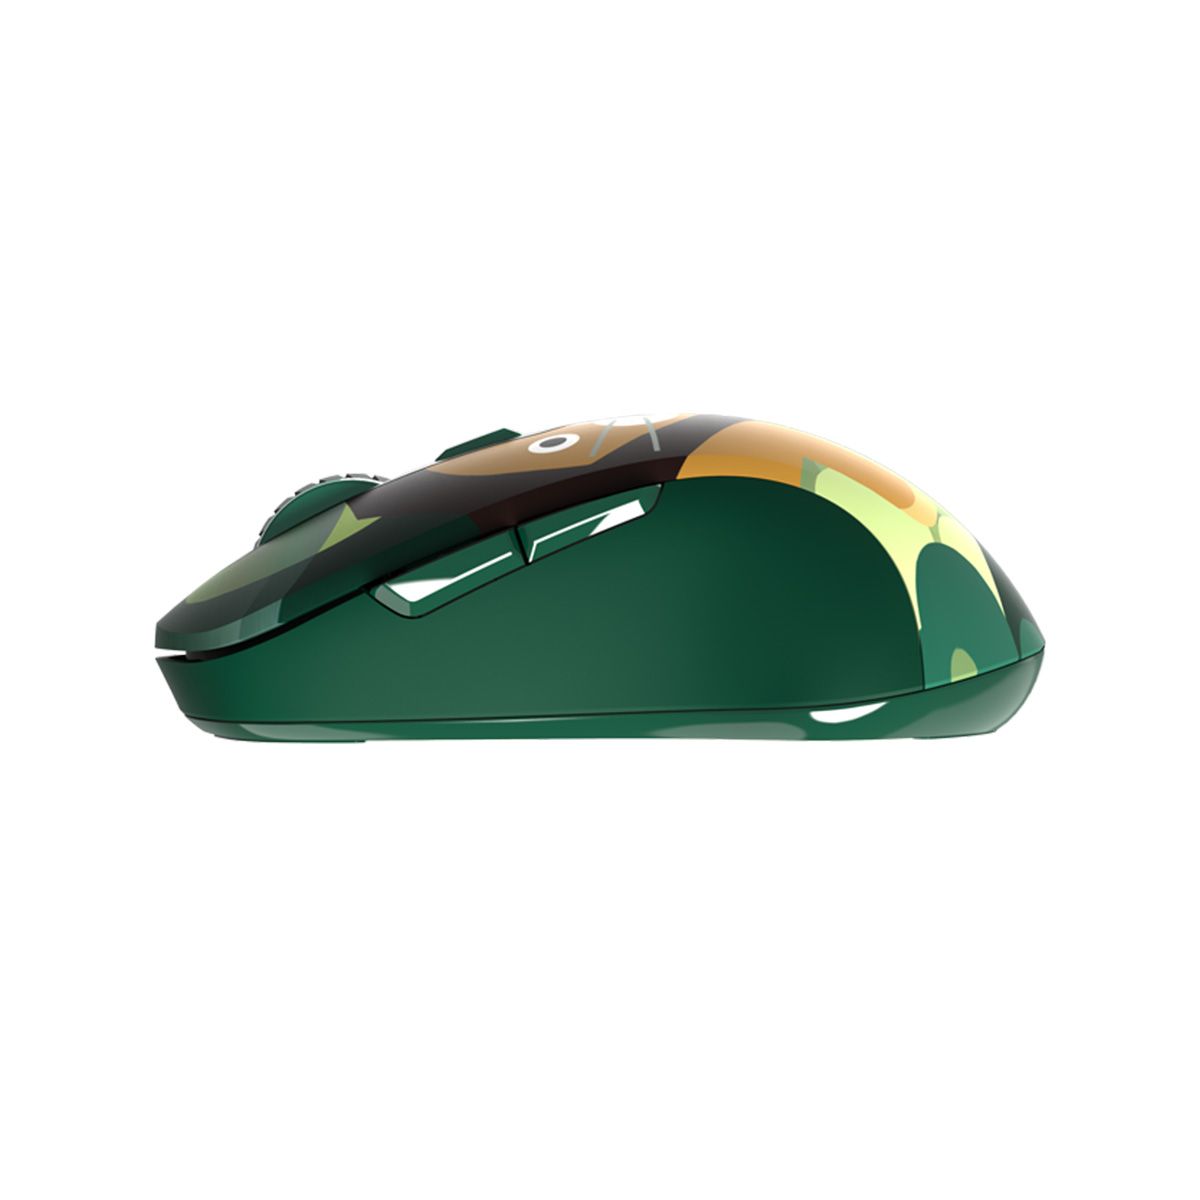 DAREU LM115G SPARROW Wireless Office/Gaming Mouse (Cute Lion)